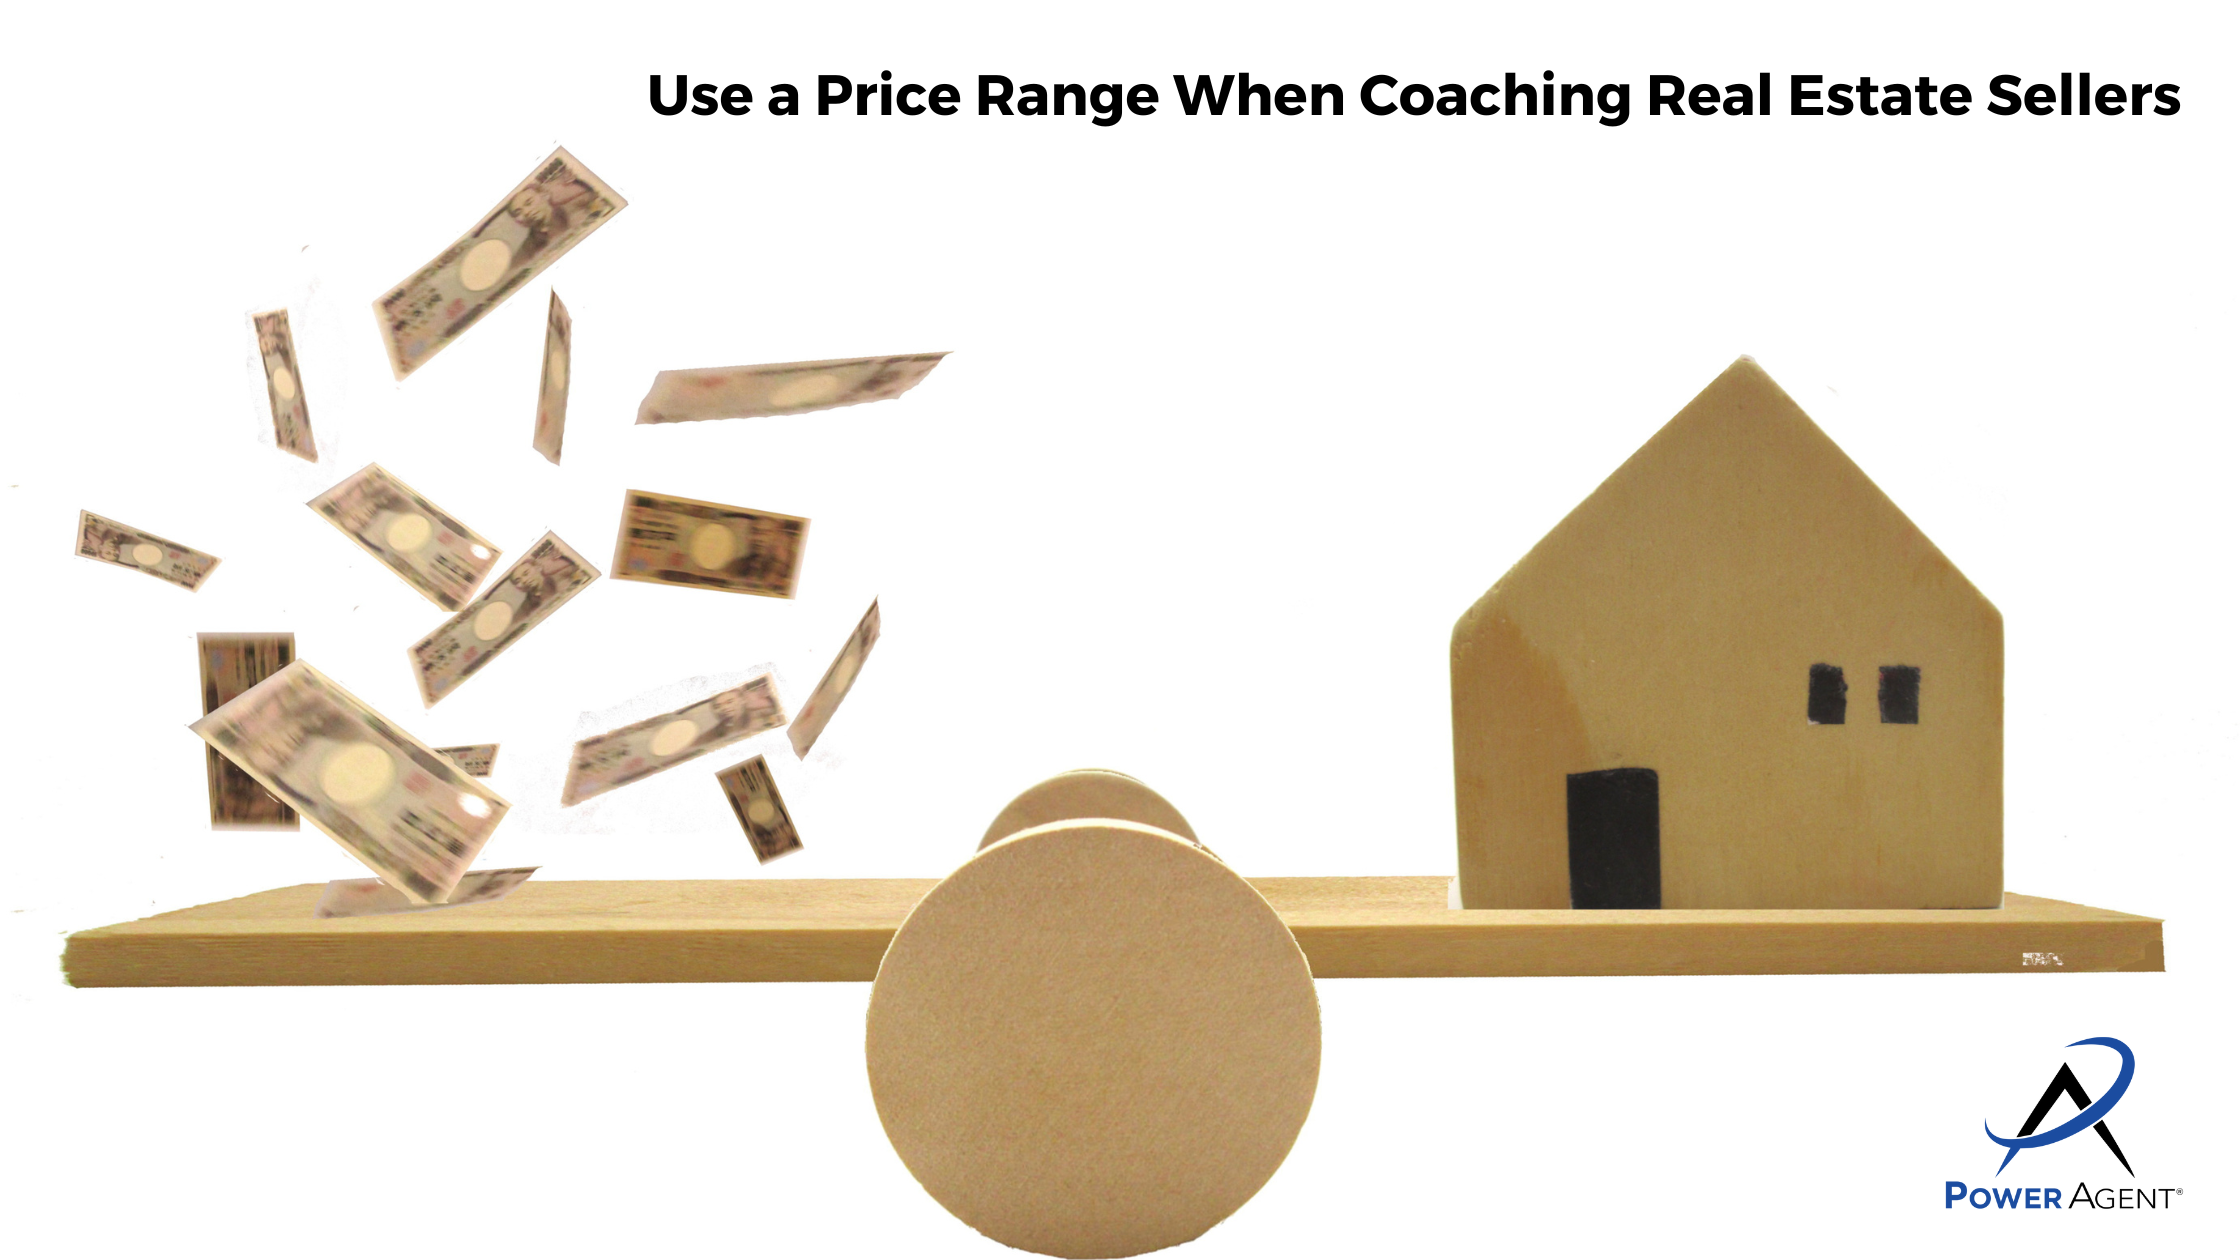 Use a Price Range When Coaching Real Estate Sellers